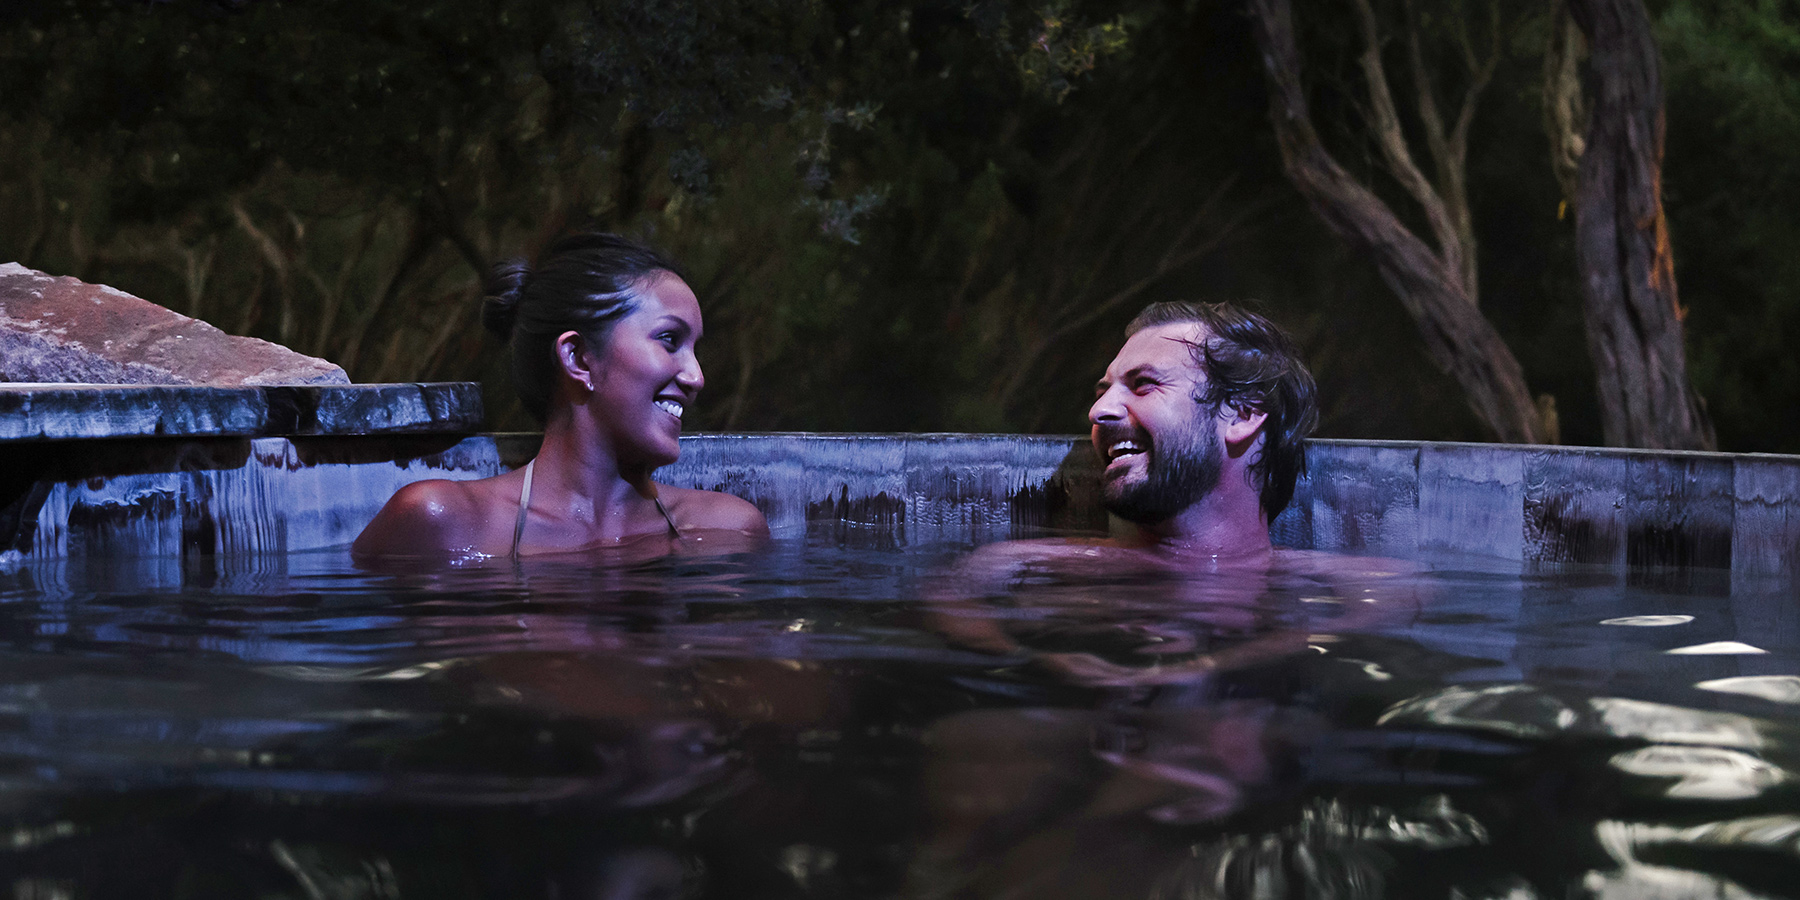 Peninsula Hot Springs - An out of the ordinary experience.